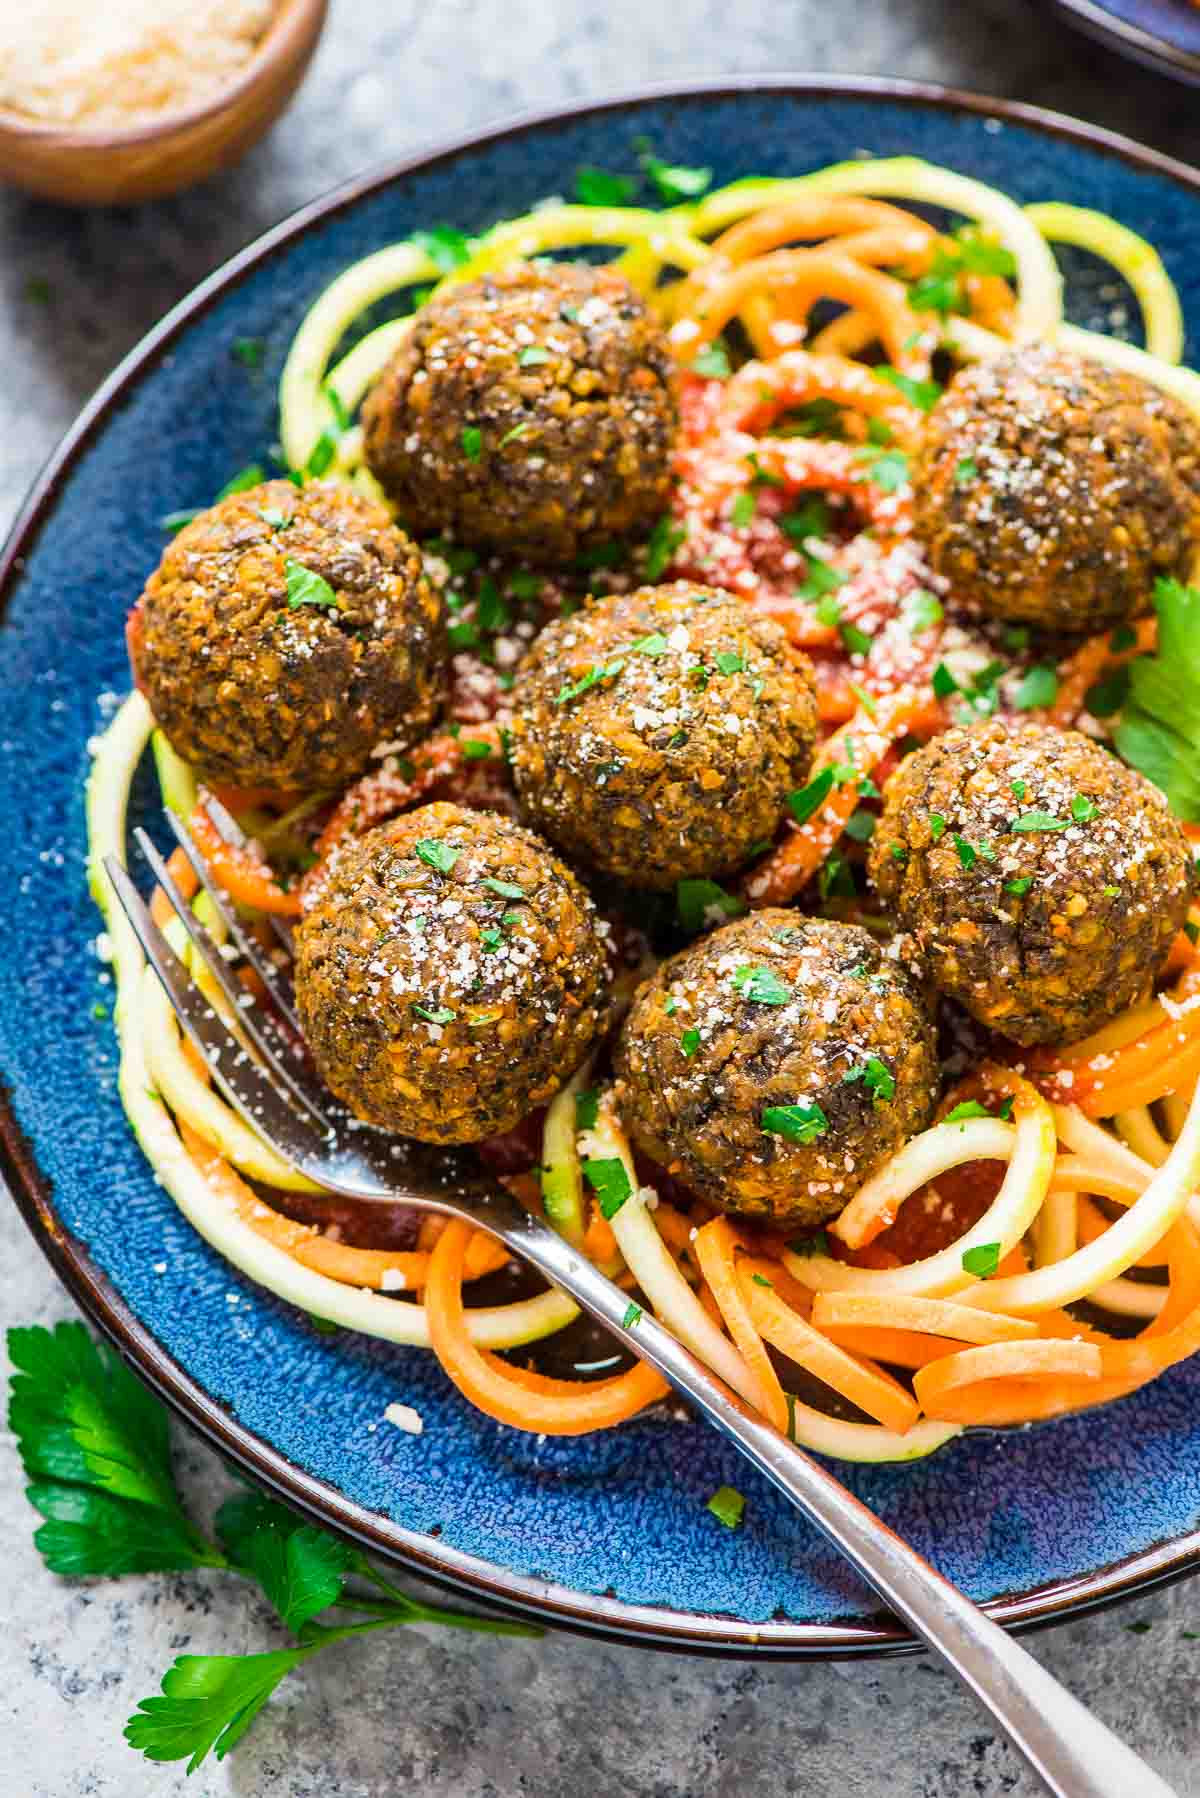 Tofu Meatball Recipes
 Lentil Meatballs Ve arian and Gluten Free WellPlated